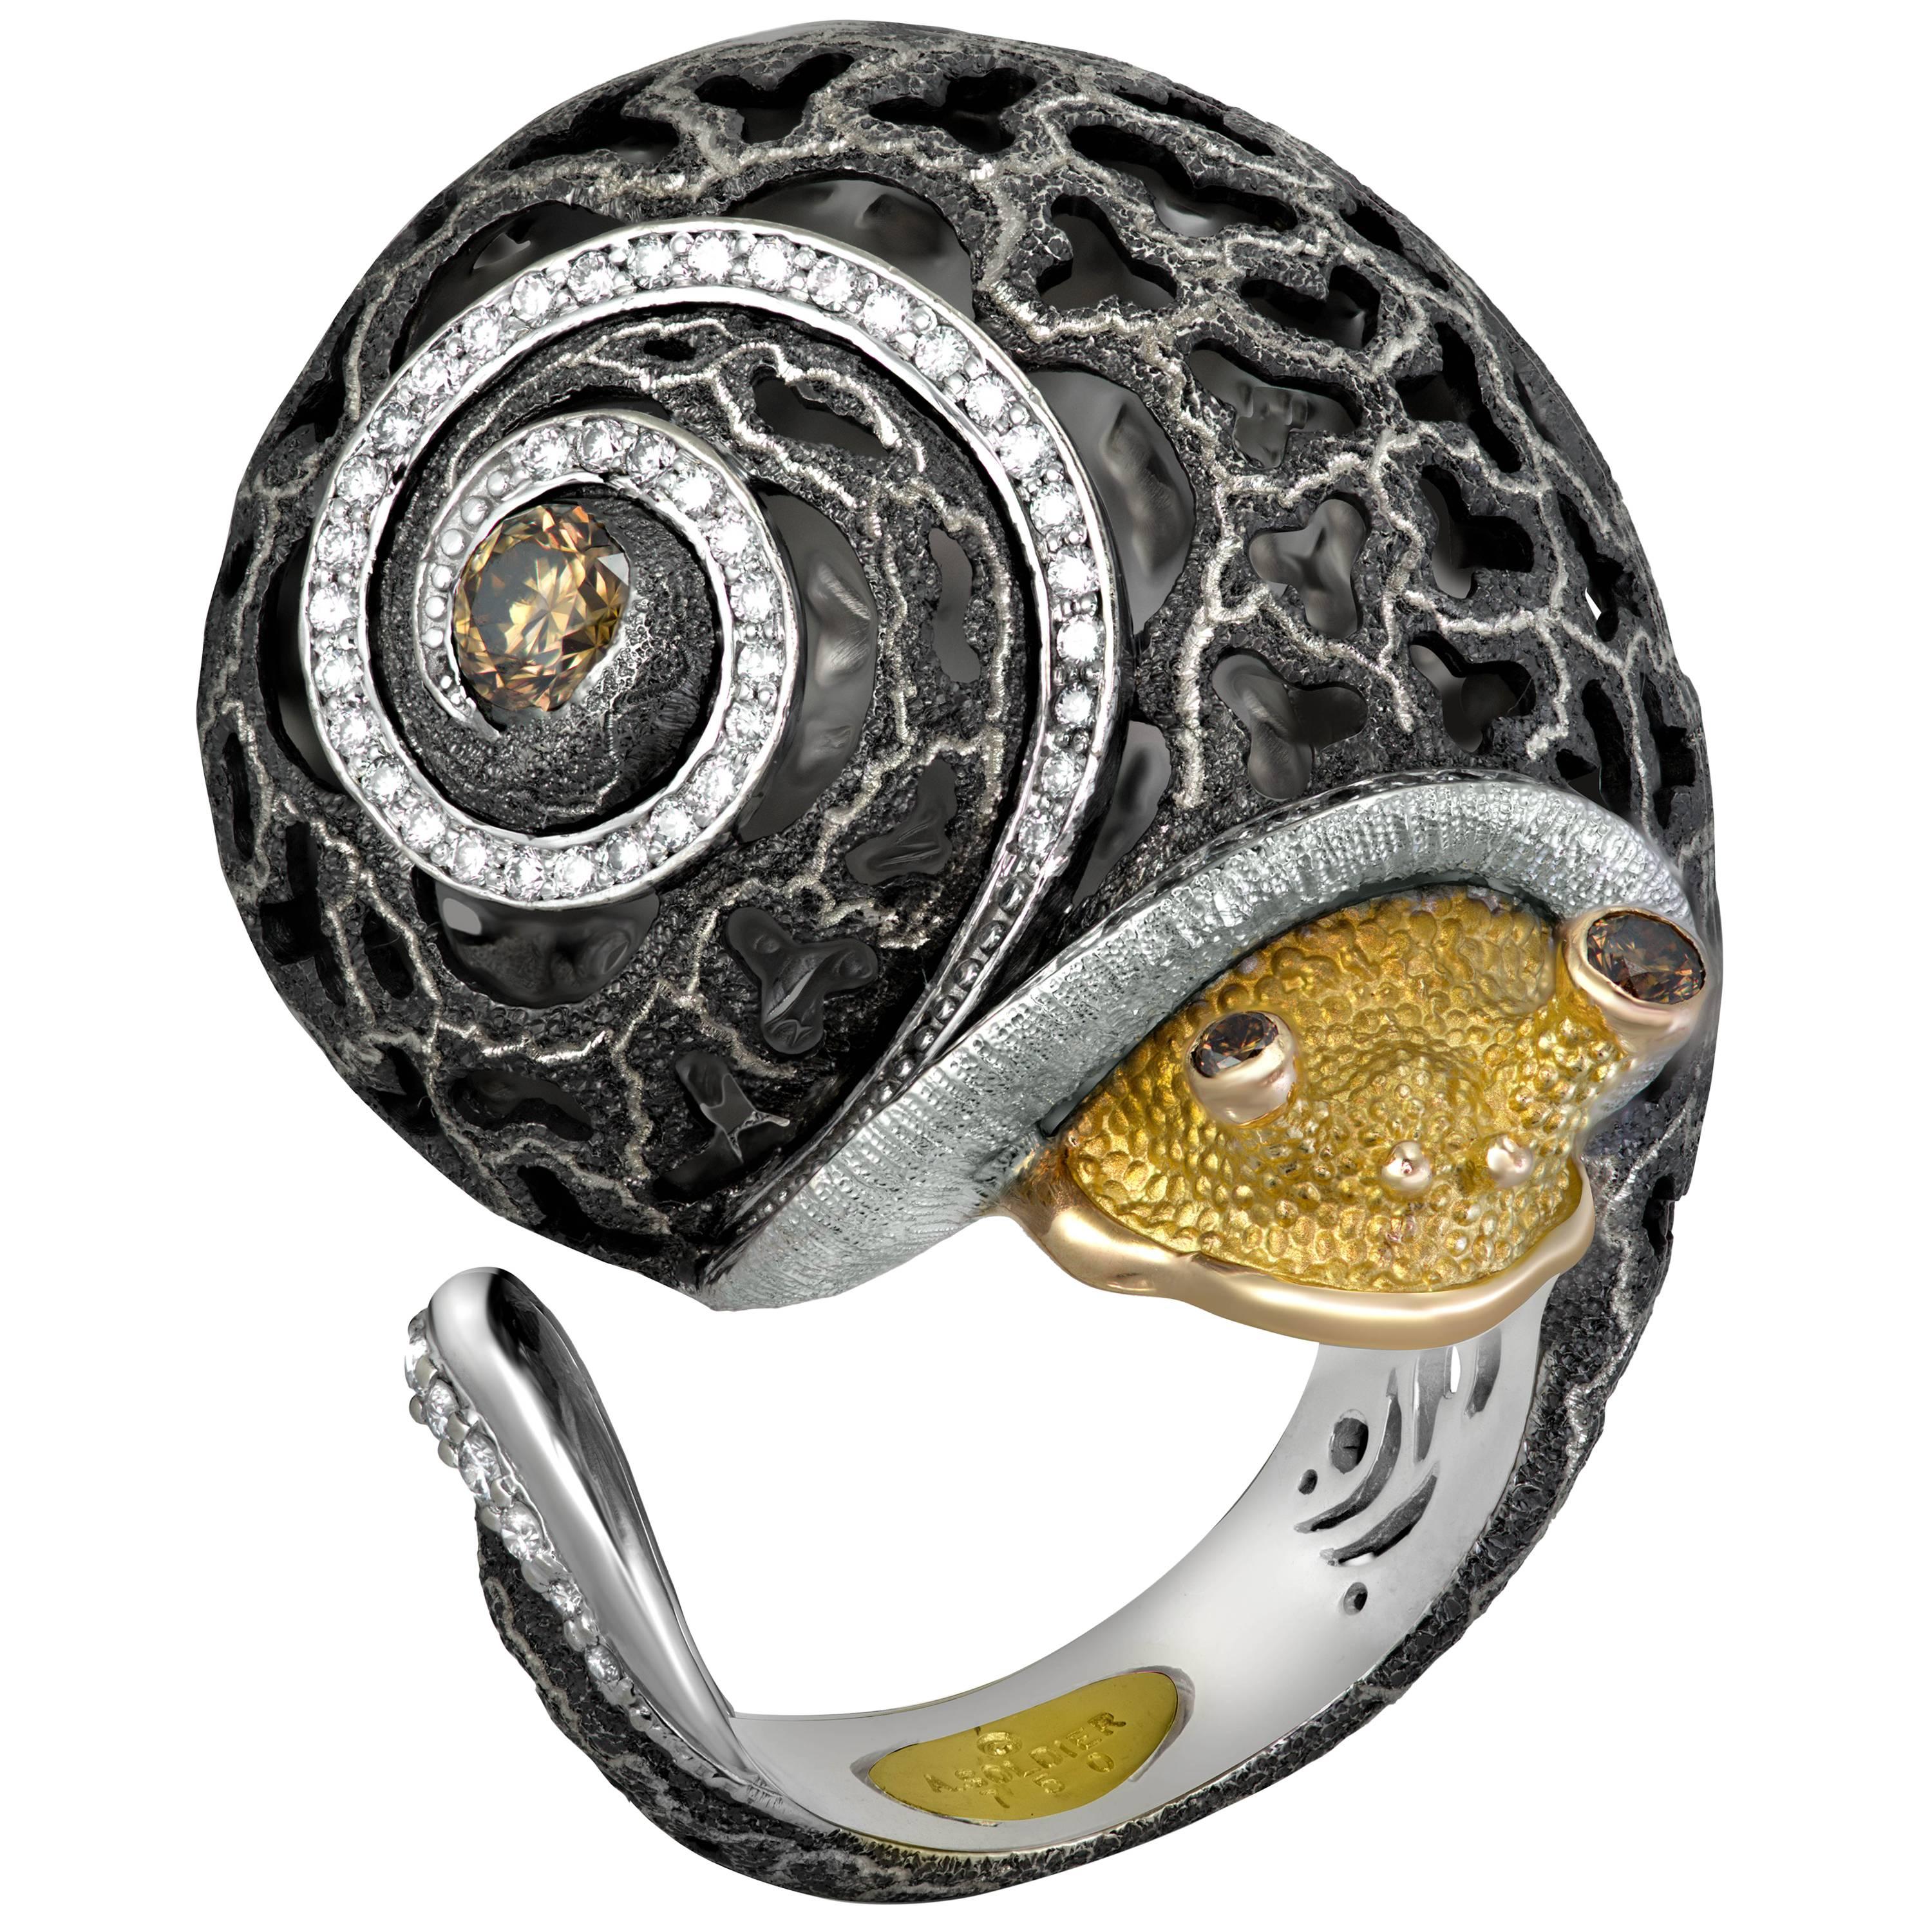 Alex Soldier Diamond Blackened Gold Codi The Snail Ring One of a kind